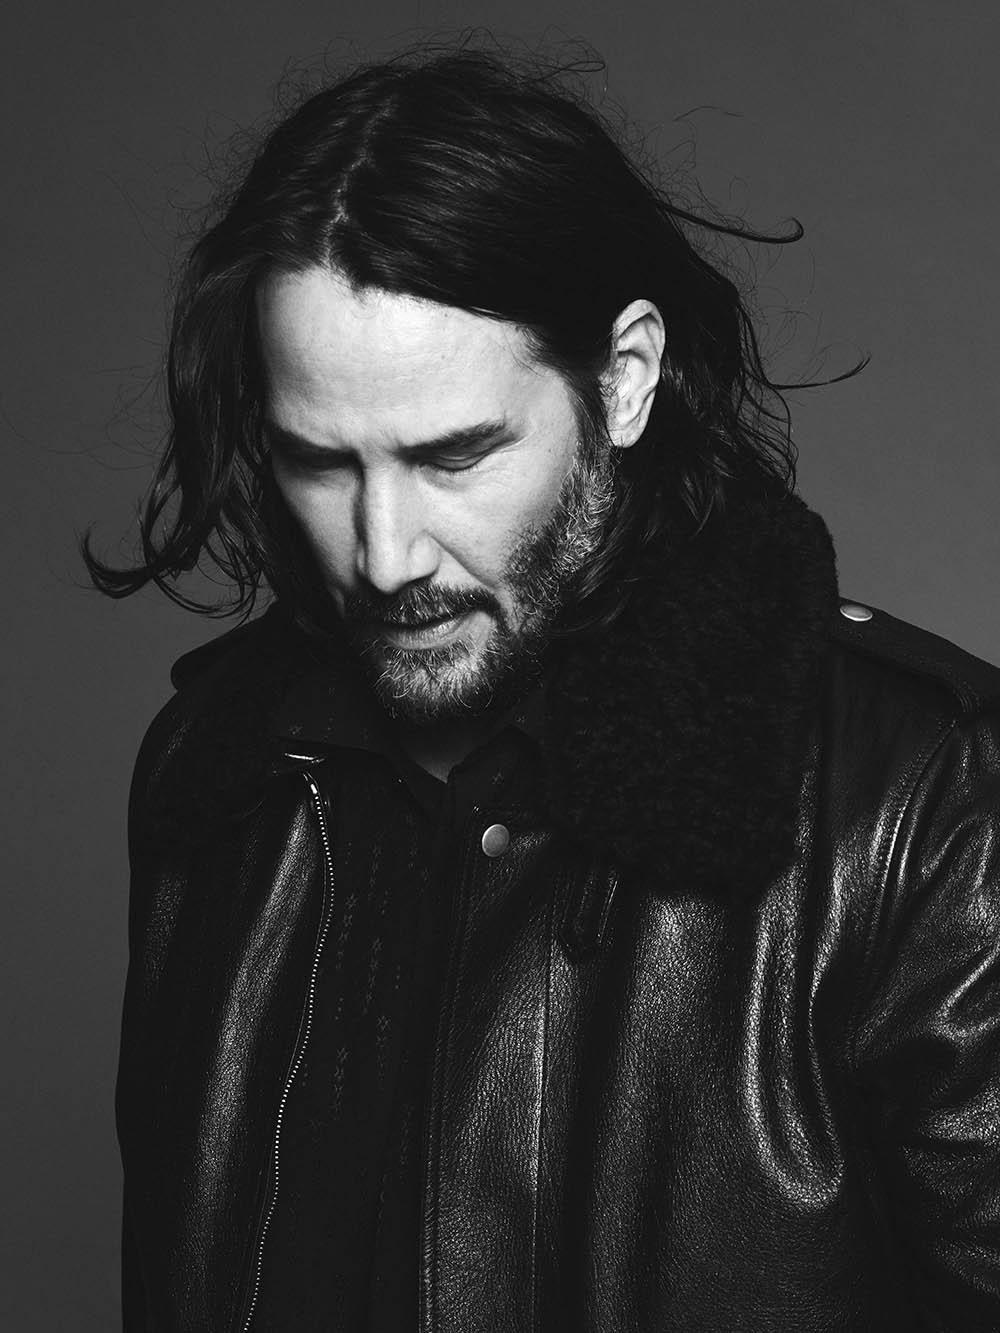 Saint Laurent Men’s Fall Winter 2019 Campaign with Keanu Reeves